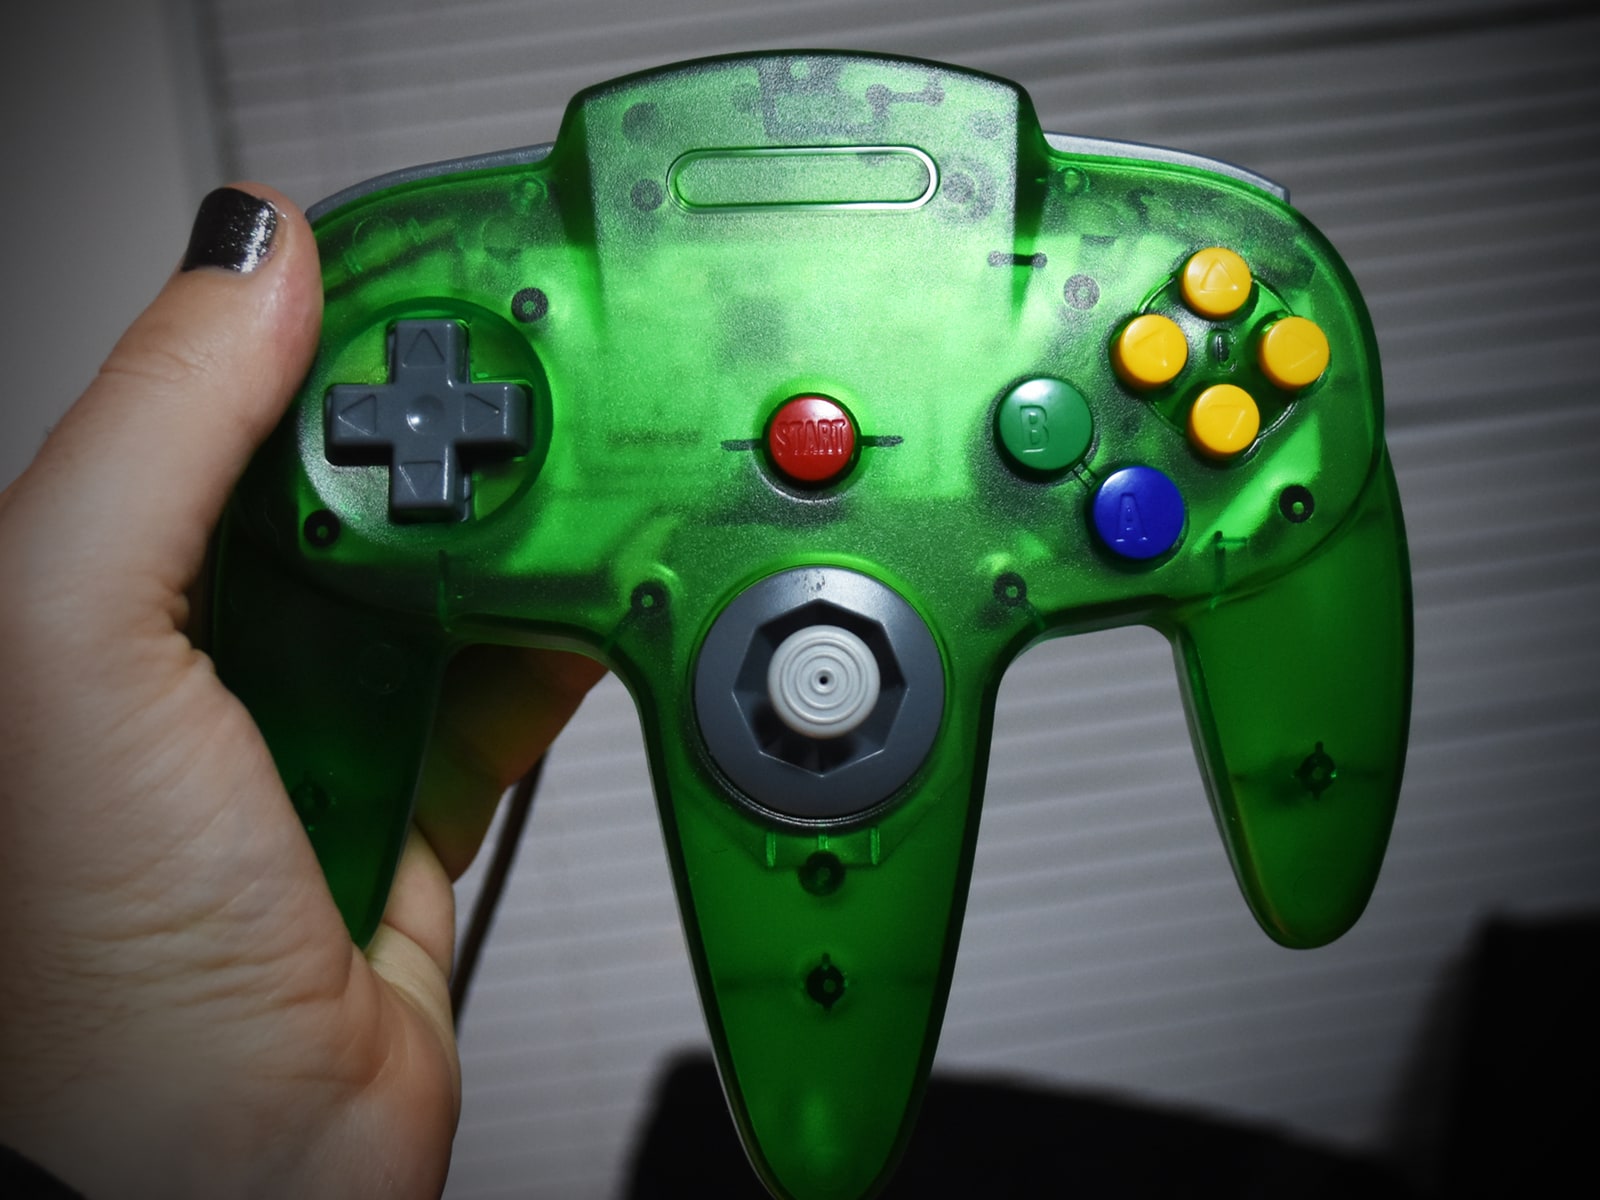 Off-brand Nintendo 64-style controller for PC